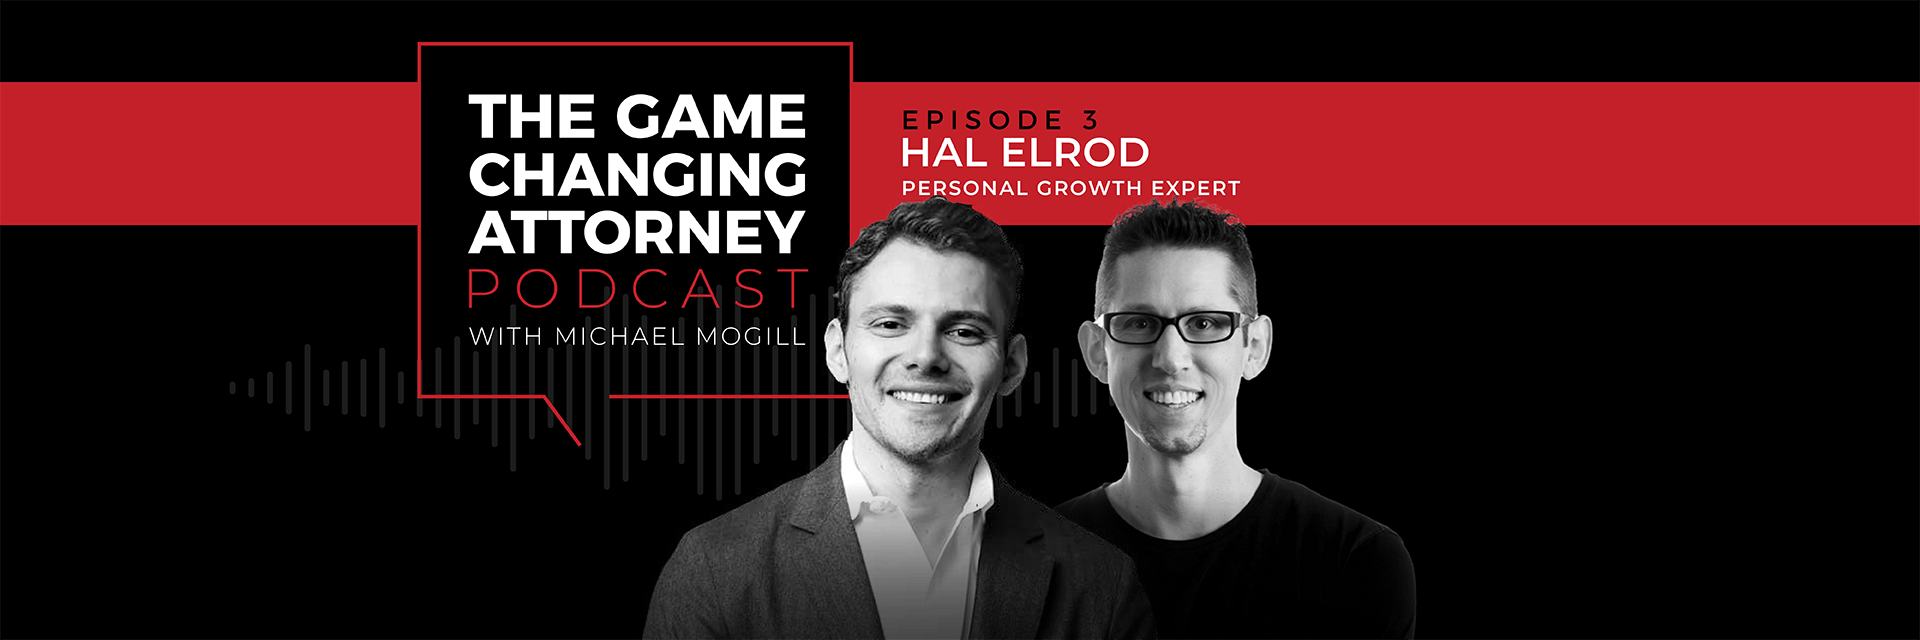 The Game Changing Attorney Podcast: Hal Elrod 3